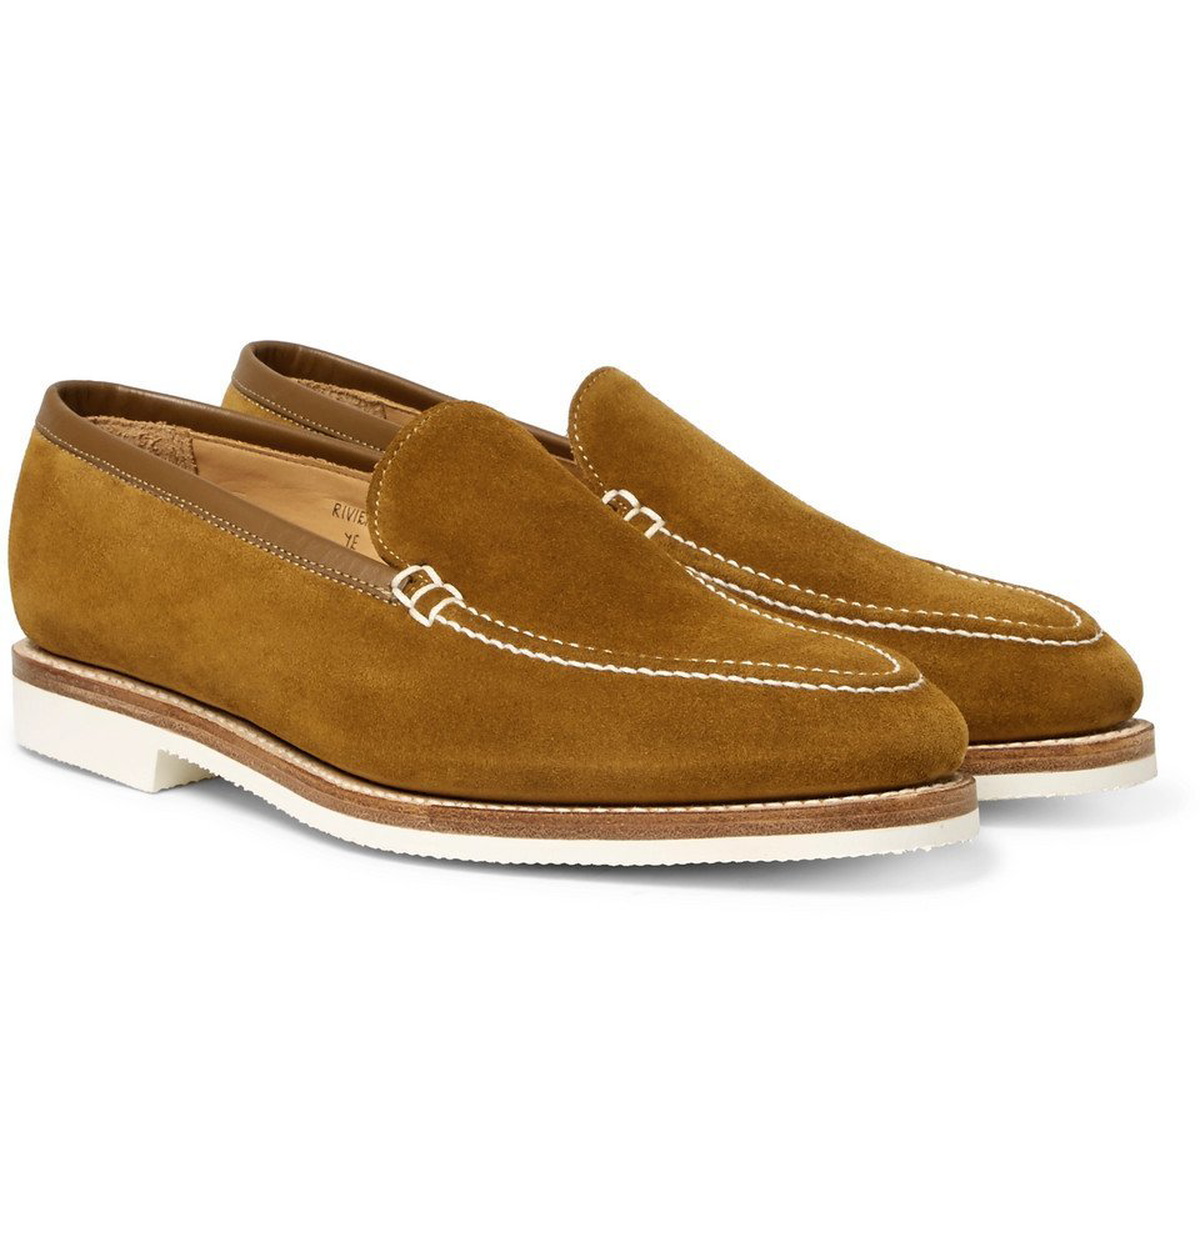 George Cleverley - Riviera Suede Loafers - Men - Tan George Cleverley